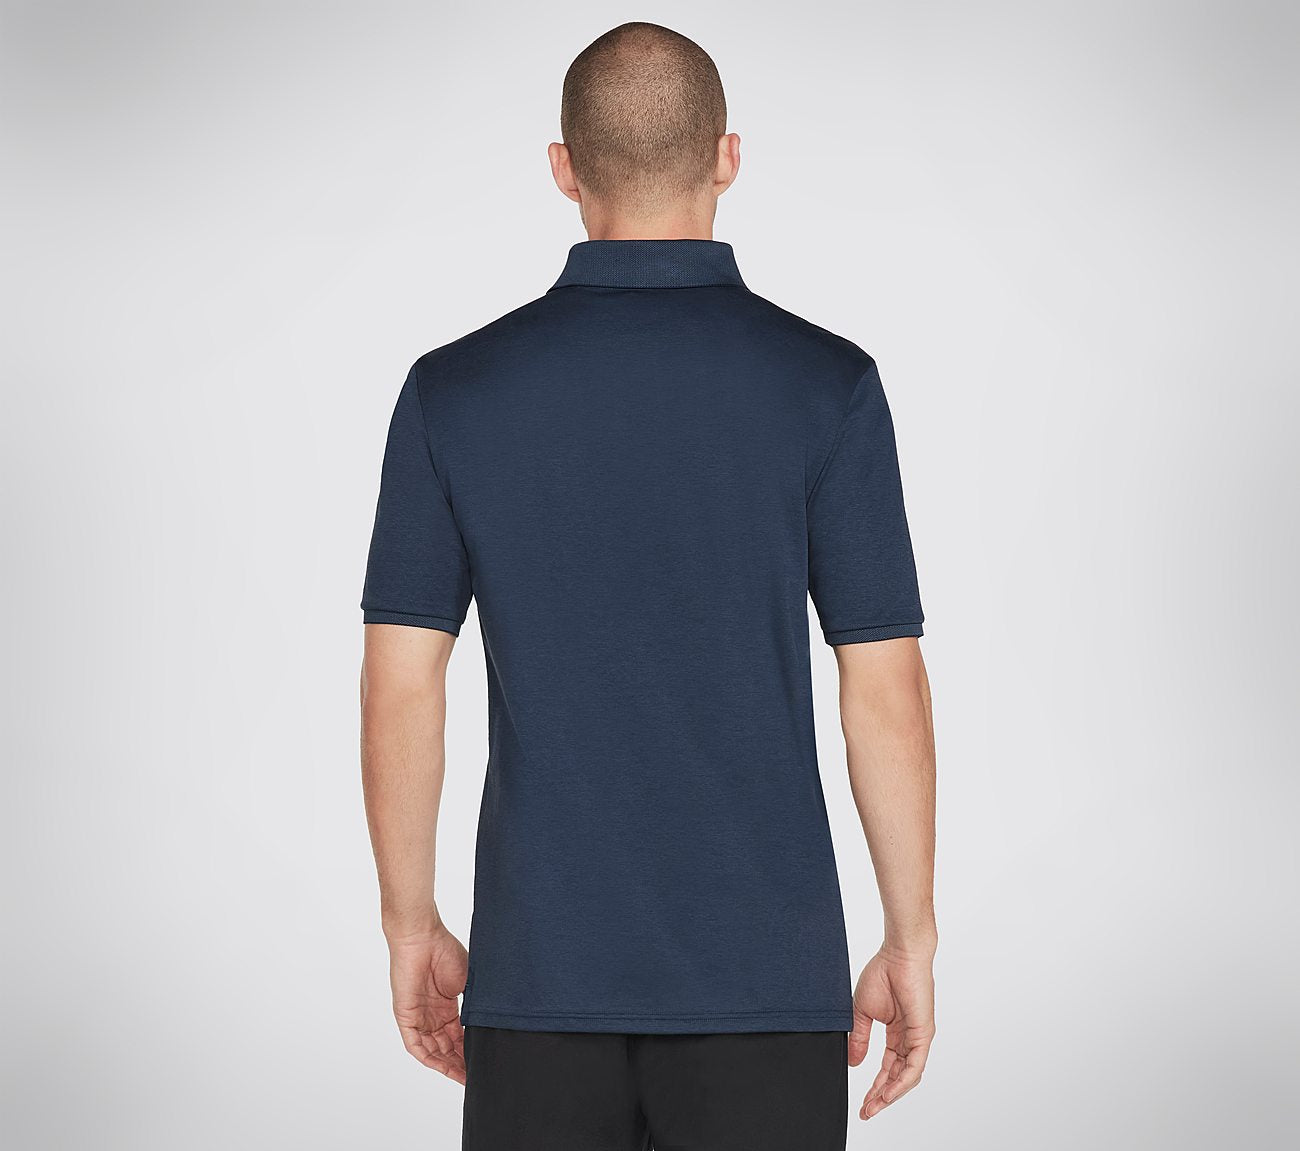 Skechers Apparel Off Duty Polo Shirt Clothes Skechers